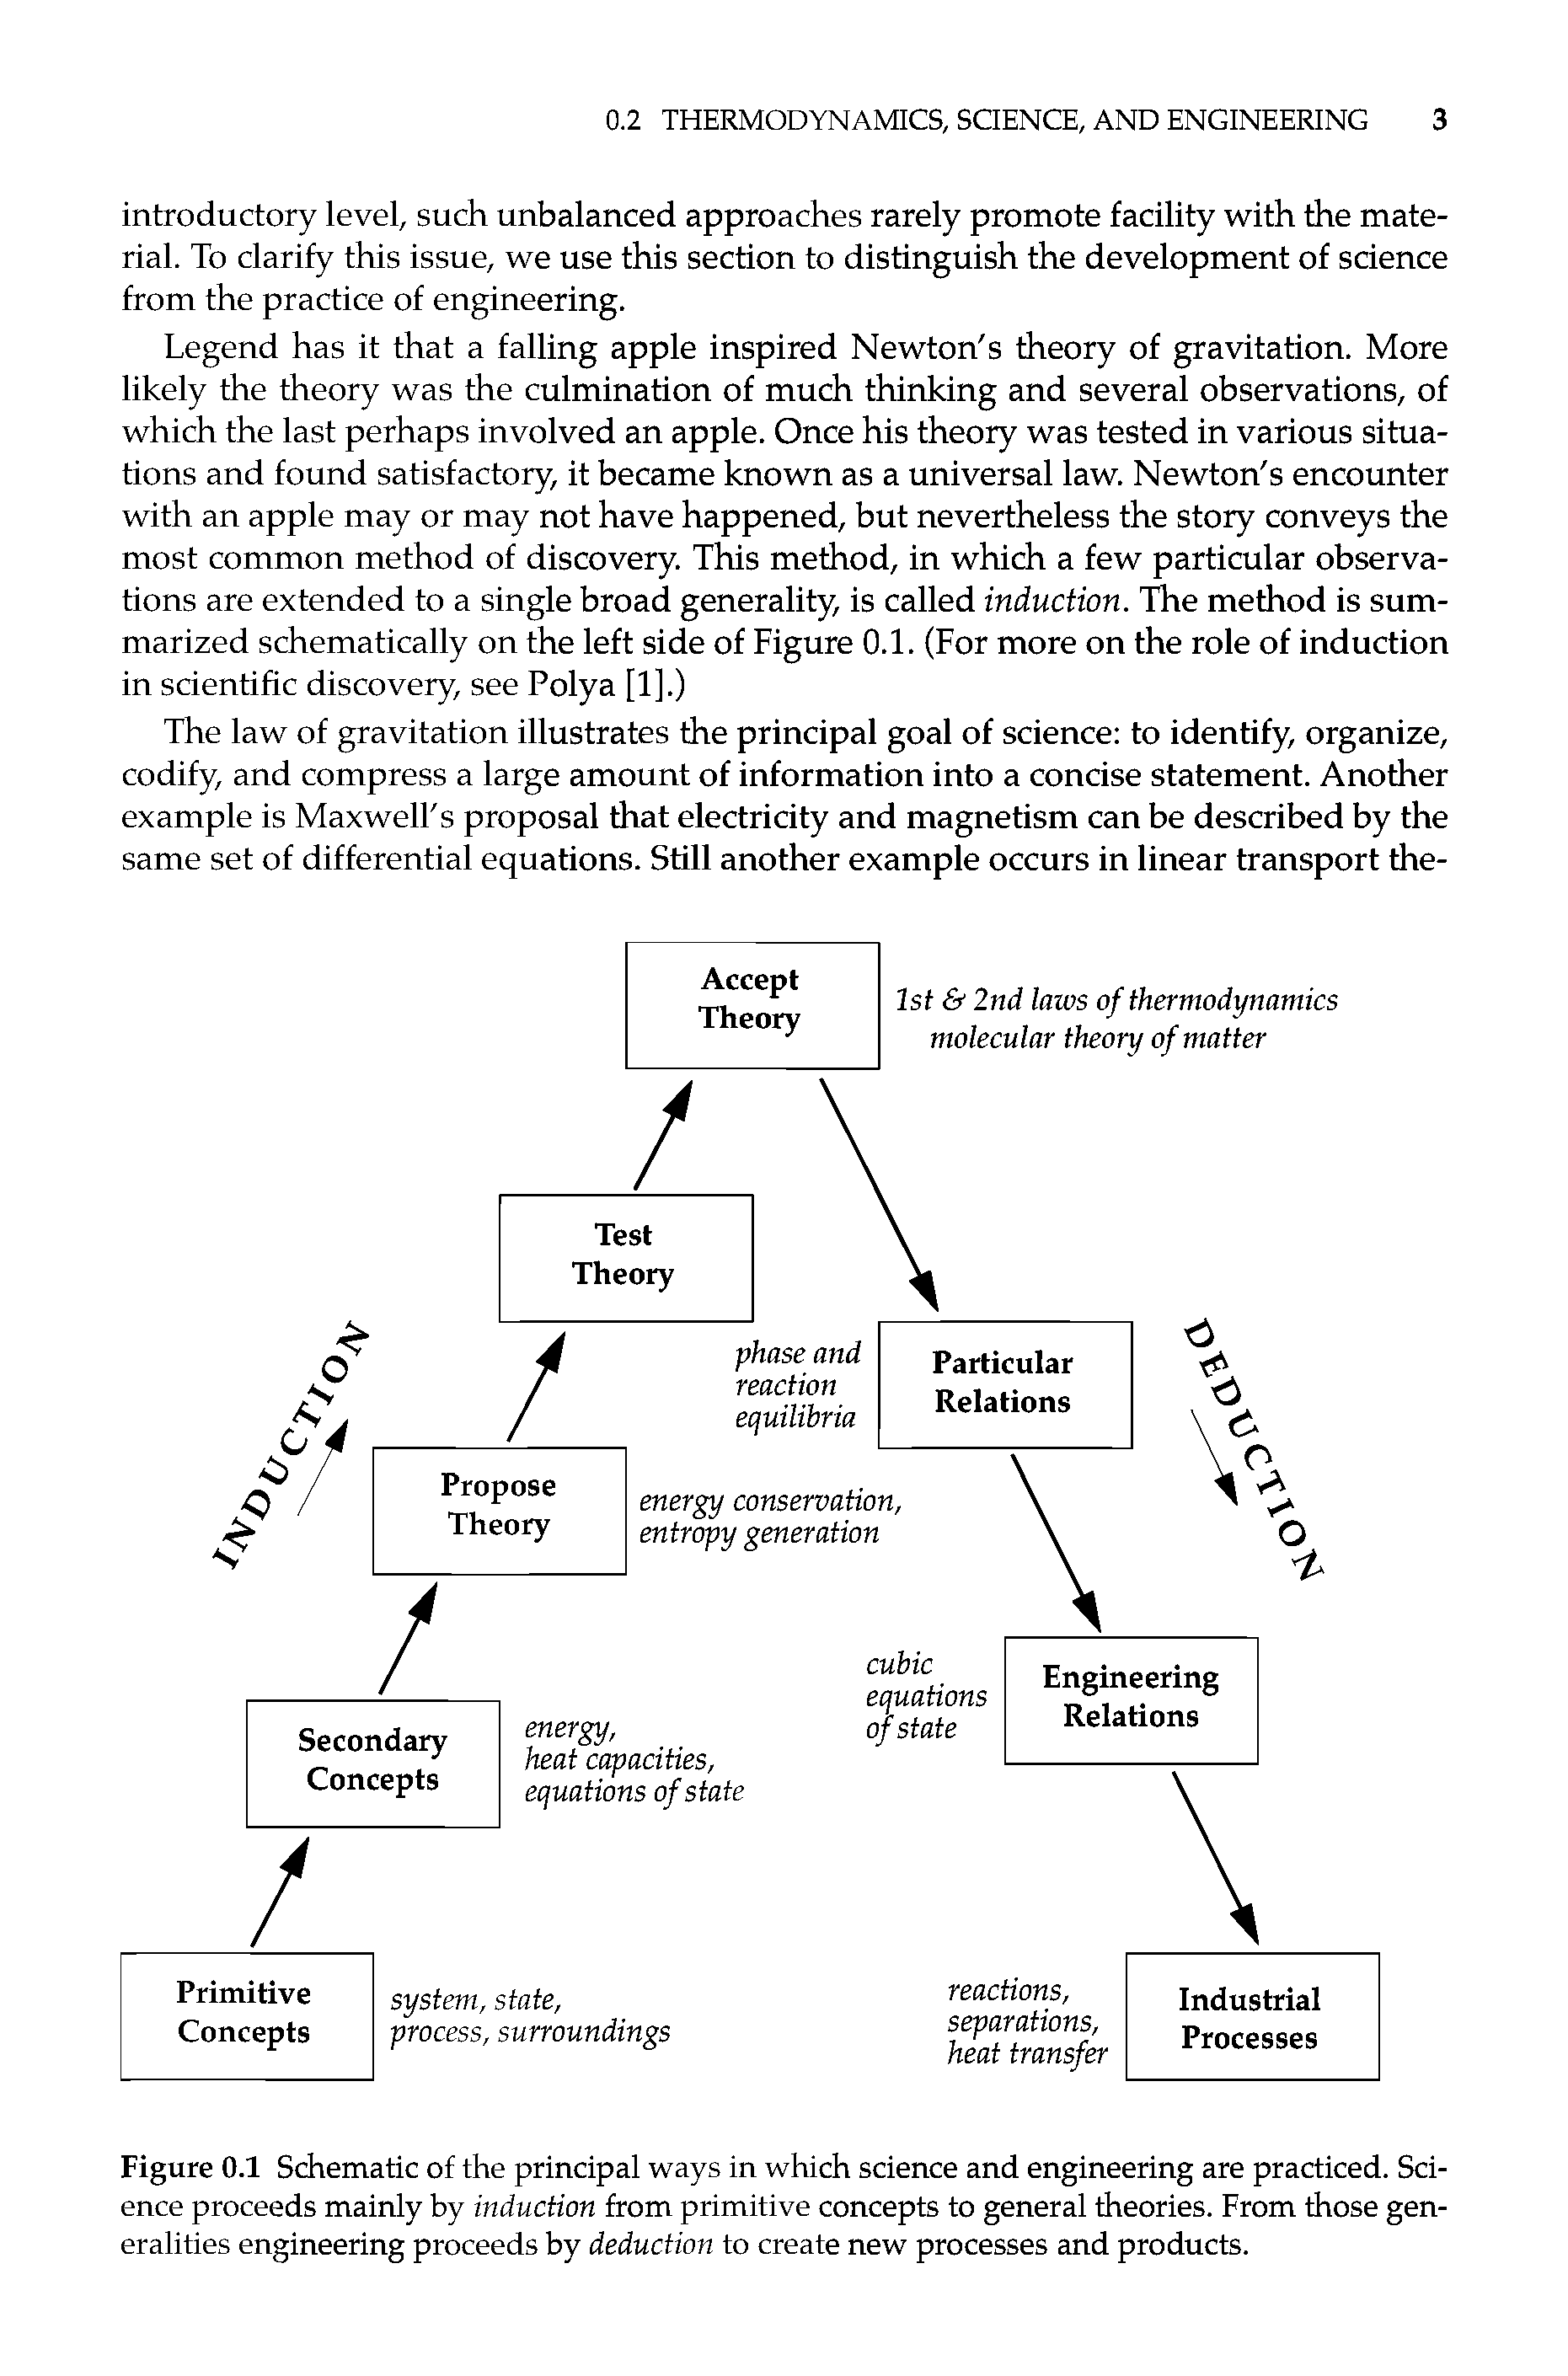 Figure 0.1 Schematic of the principal ways in which science and engineering are practiced. Science proceeds mainly by induction from primitive concepts to general theories. From those generalities engineering proceeds by deduction to create new processes and products.